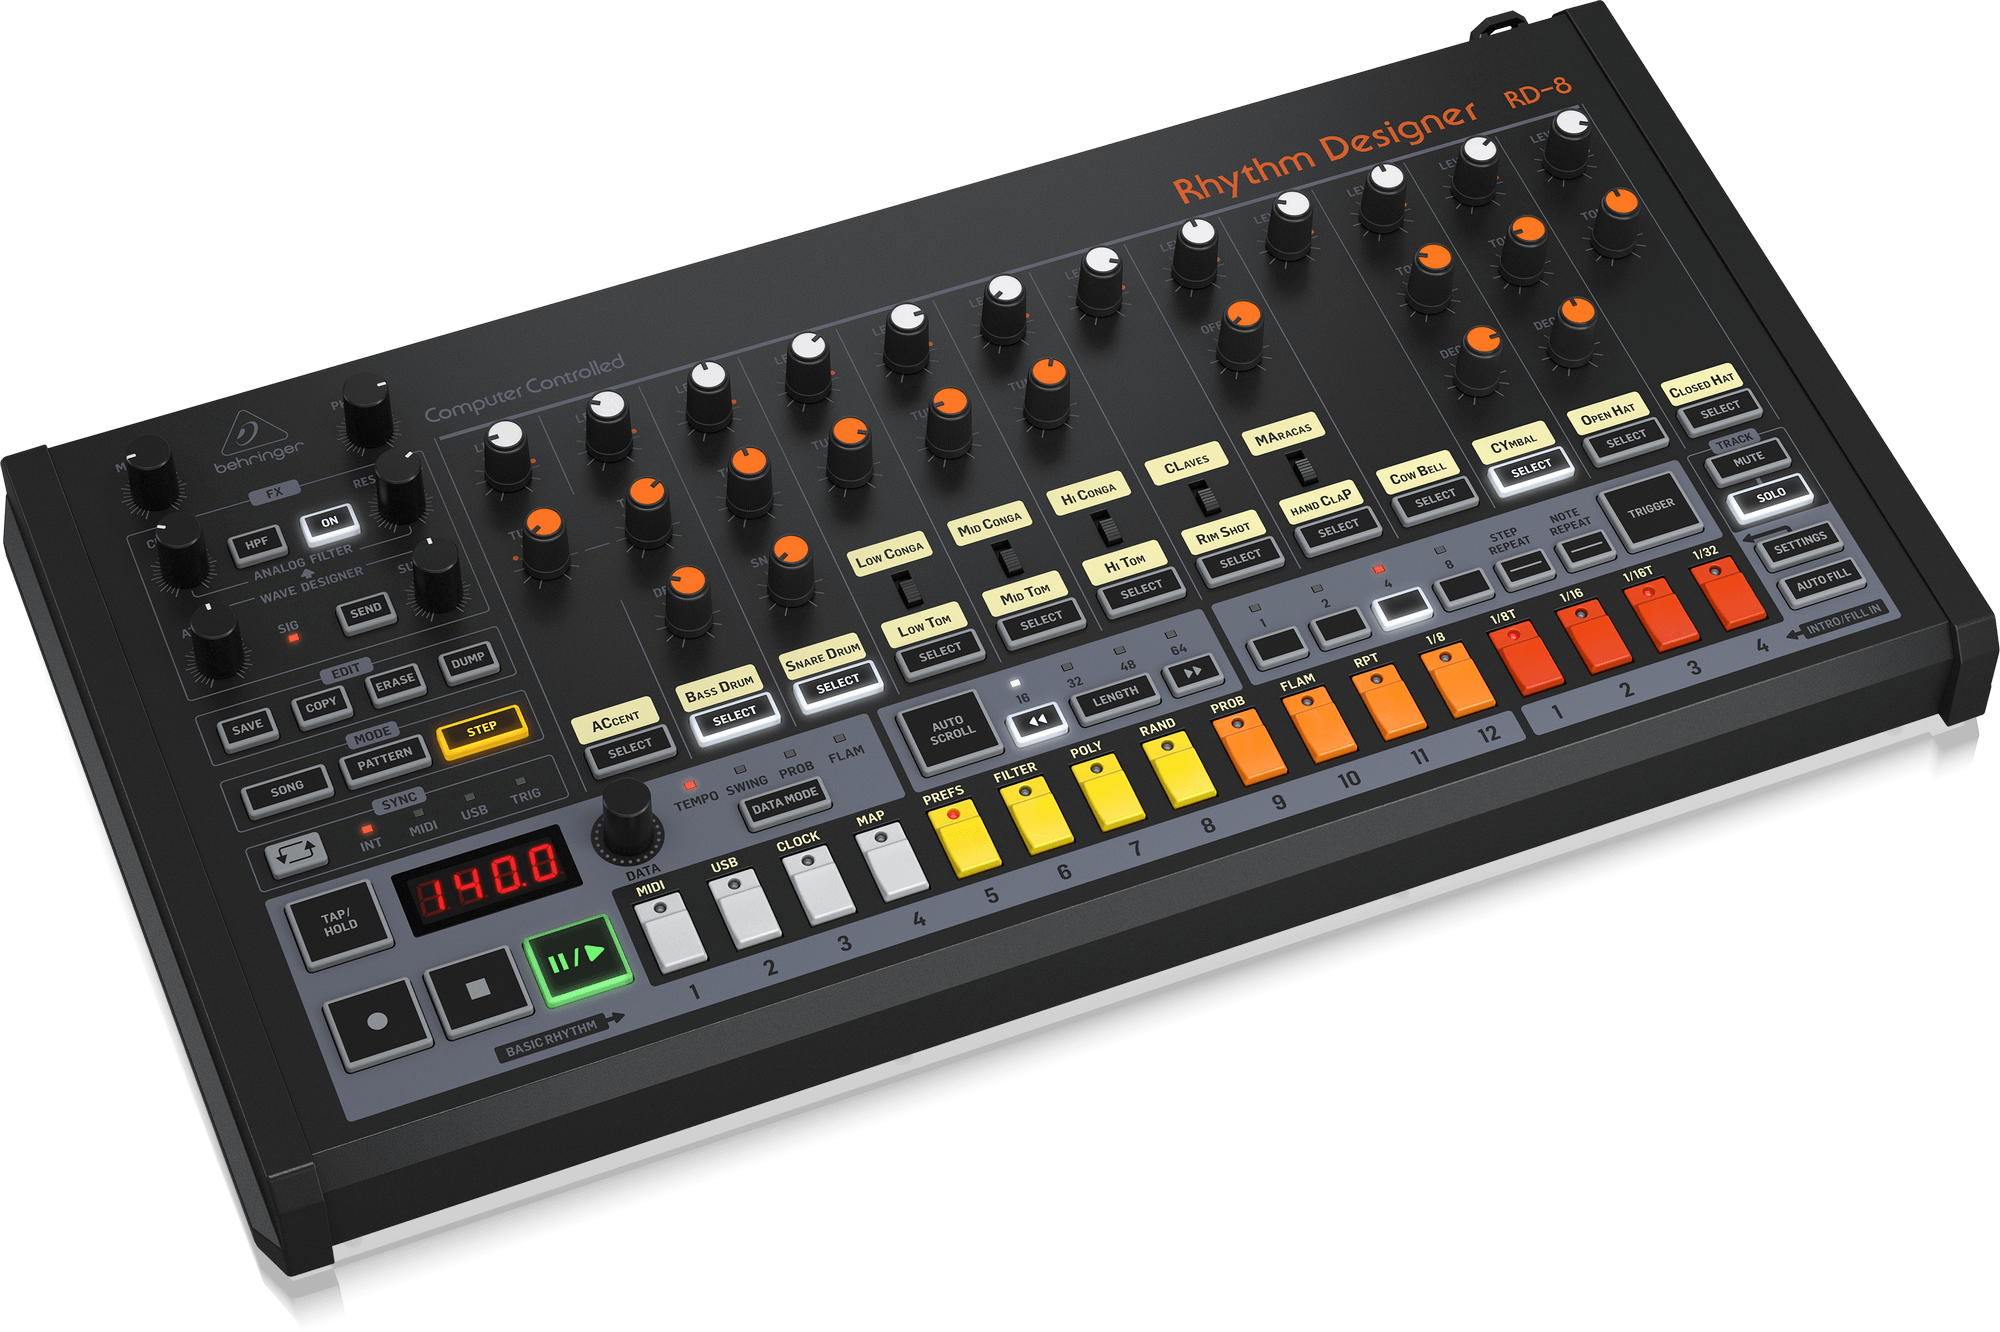 Behringer | Product | RD-8